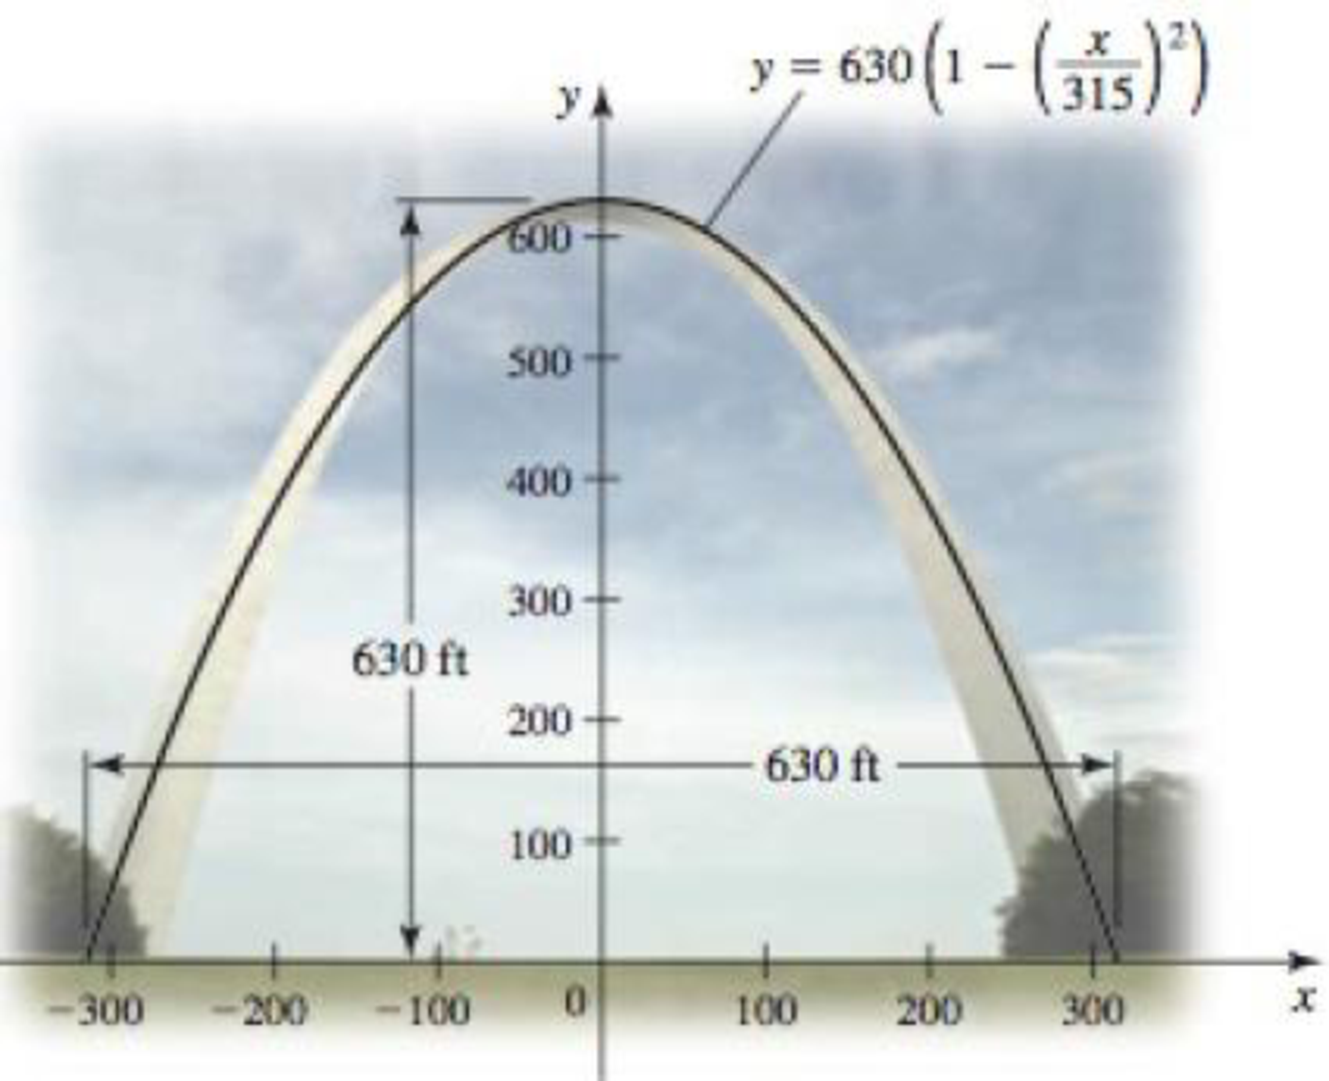 Chapter 5.4, Problem 47E, Gateway Arch The Gateway Arch in St. Louis is 630 ft high and has a 630-ft base. Its shape can be 